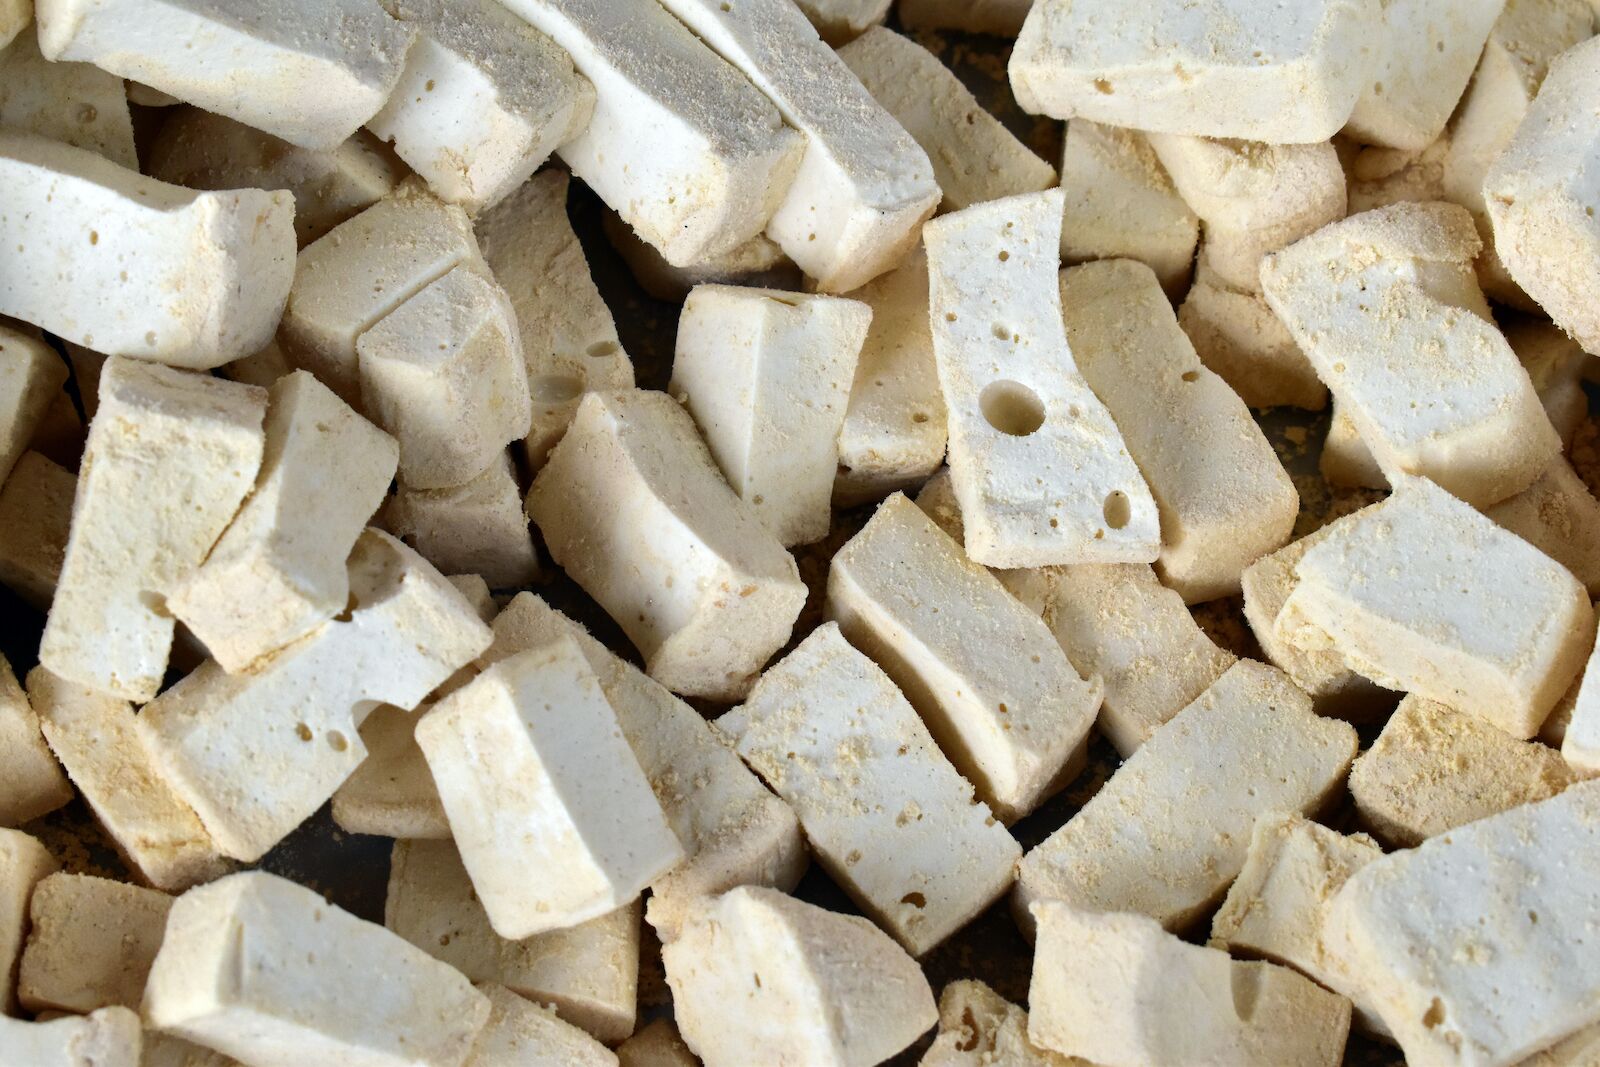 A large amount of rectangluar pieces of white yeot in a pile